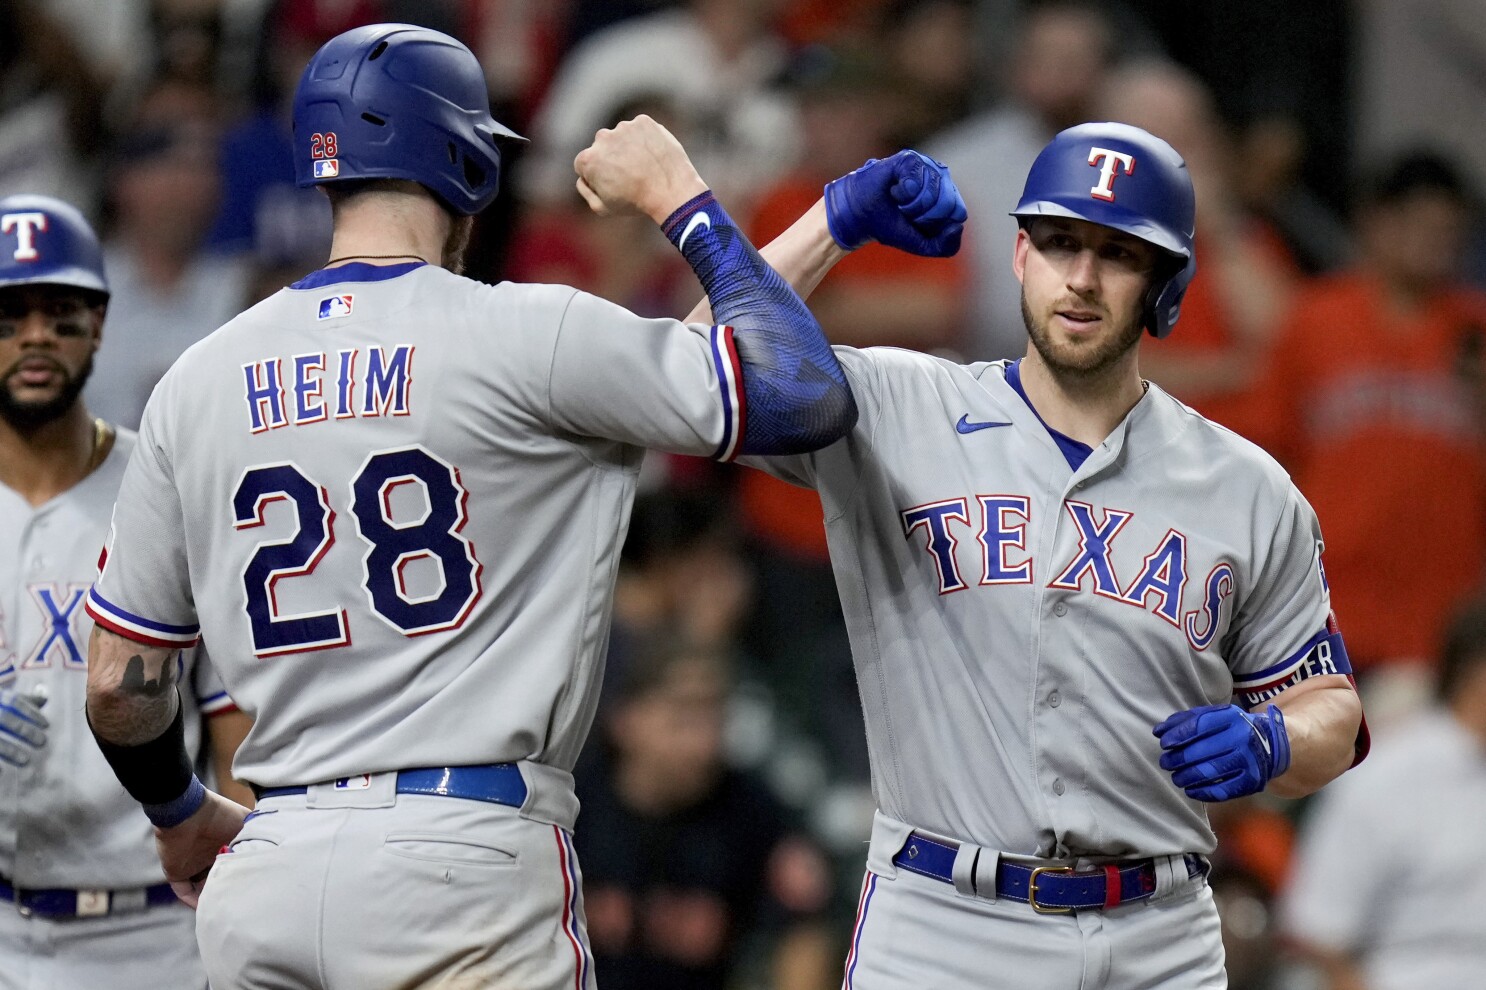 Rangers place All-Star catcher Jonah Heim on 10-day IL with a left